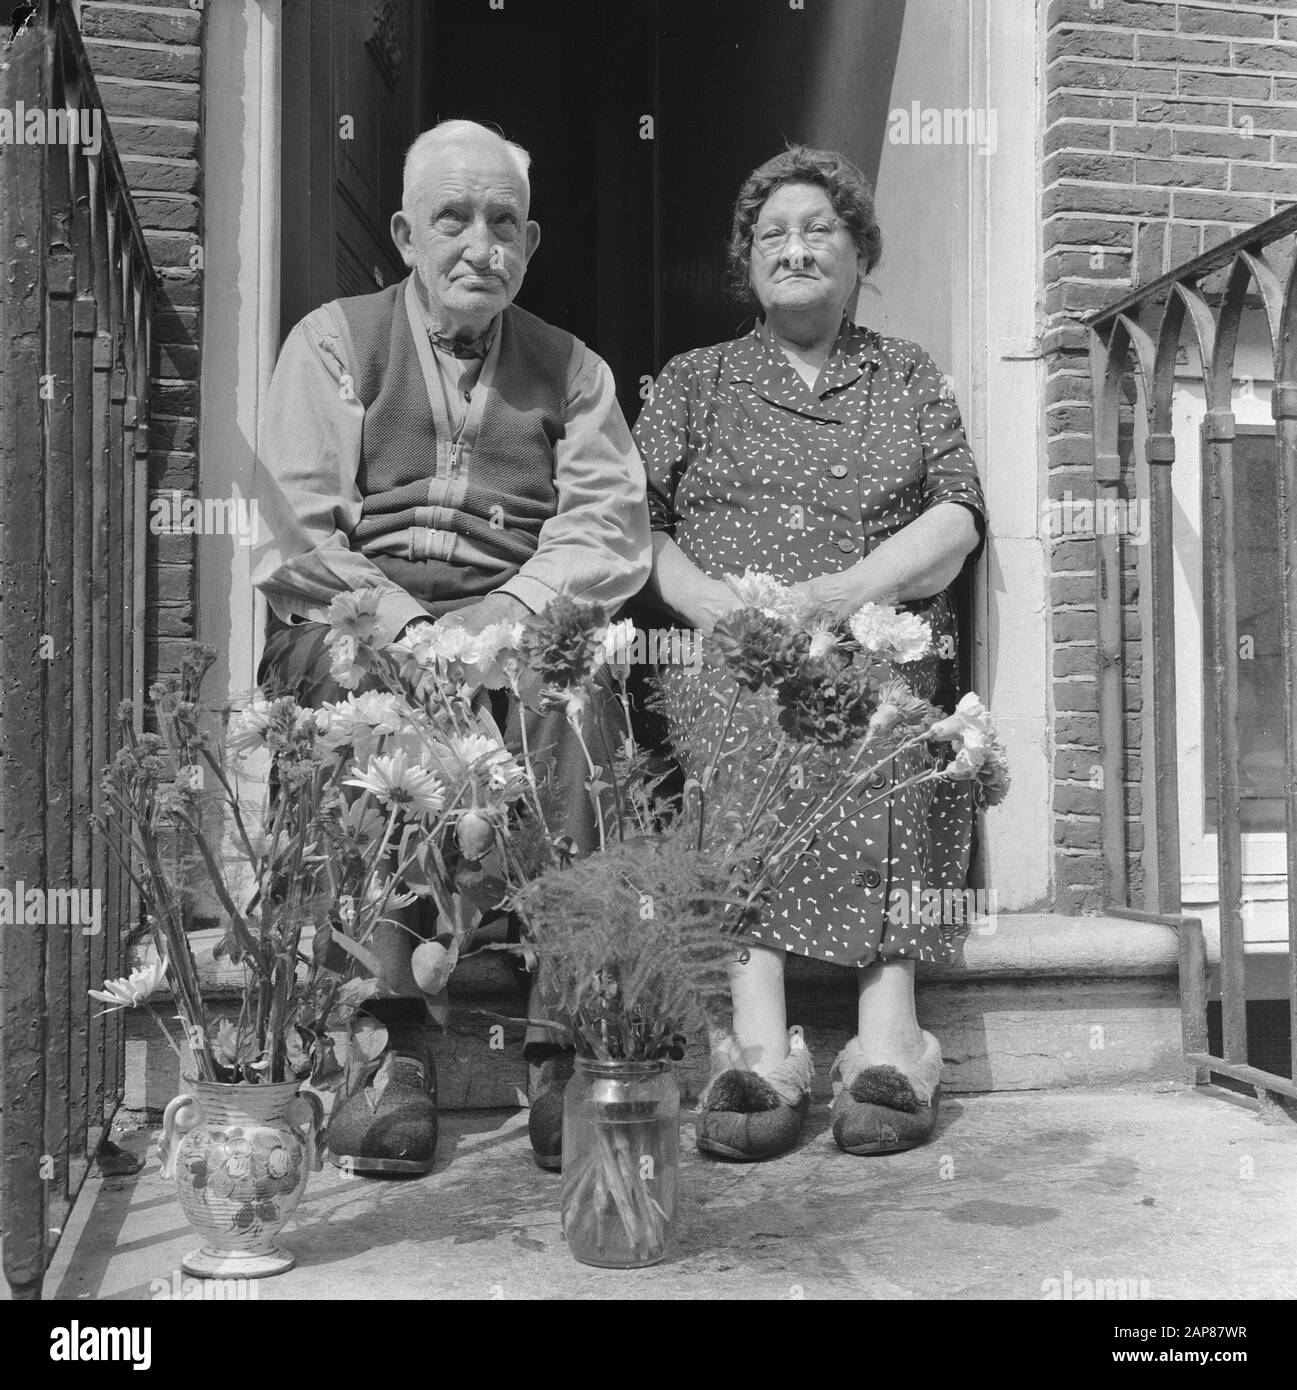 Mr. and Mrs. Cave next Tuesday 50 years married Bridal couple in doorway Date: July 13, 1967 Keywords: bridal couples, anniversaries Stock Photo